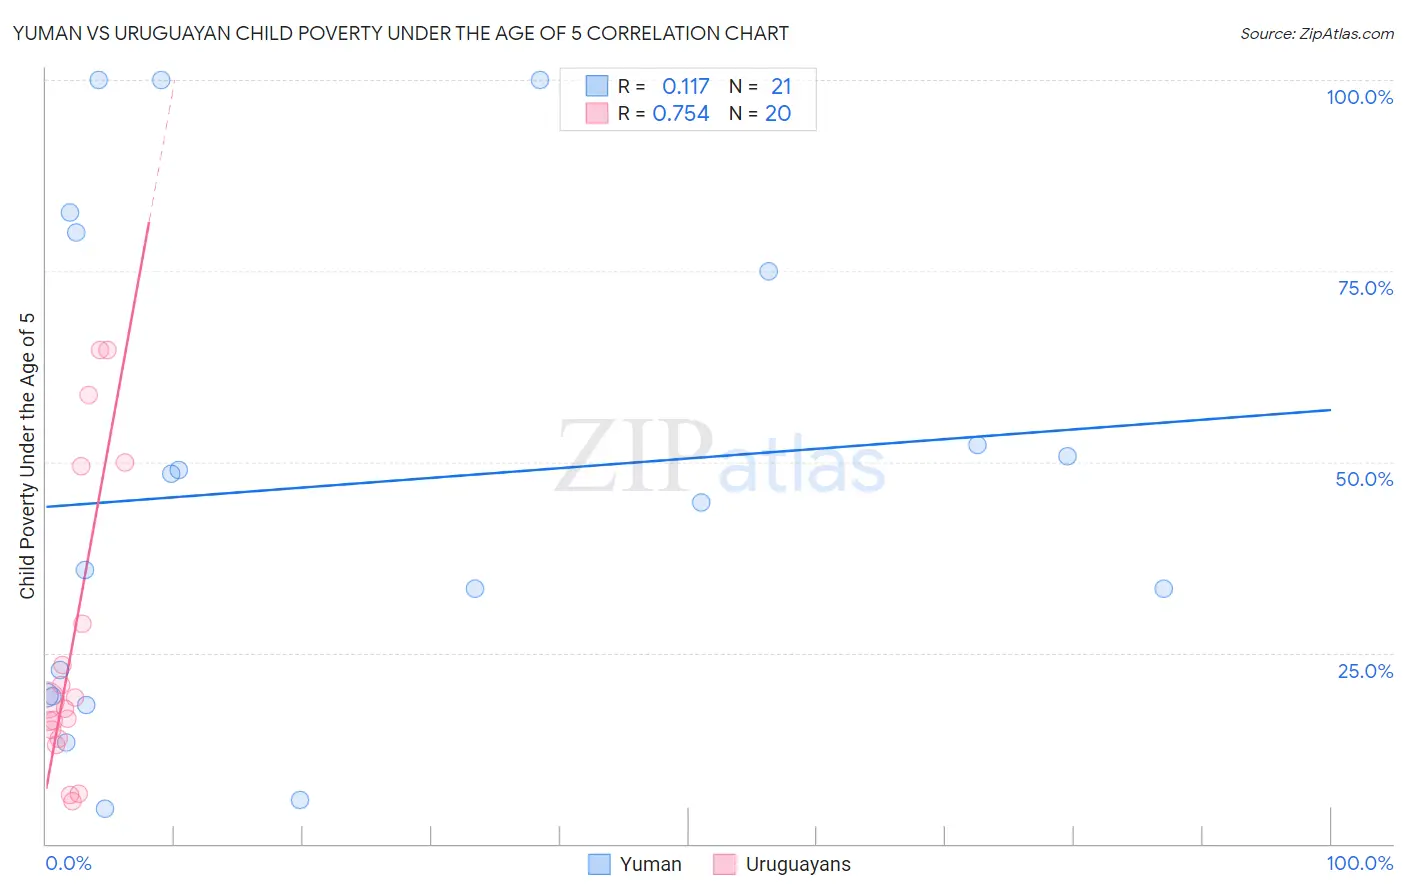 Yuman vs Uruguayan Child Poverty Under the Age of 5